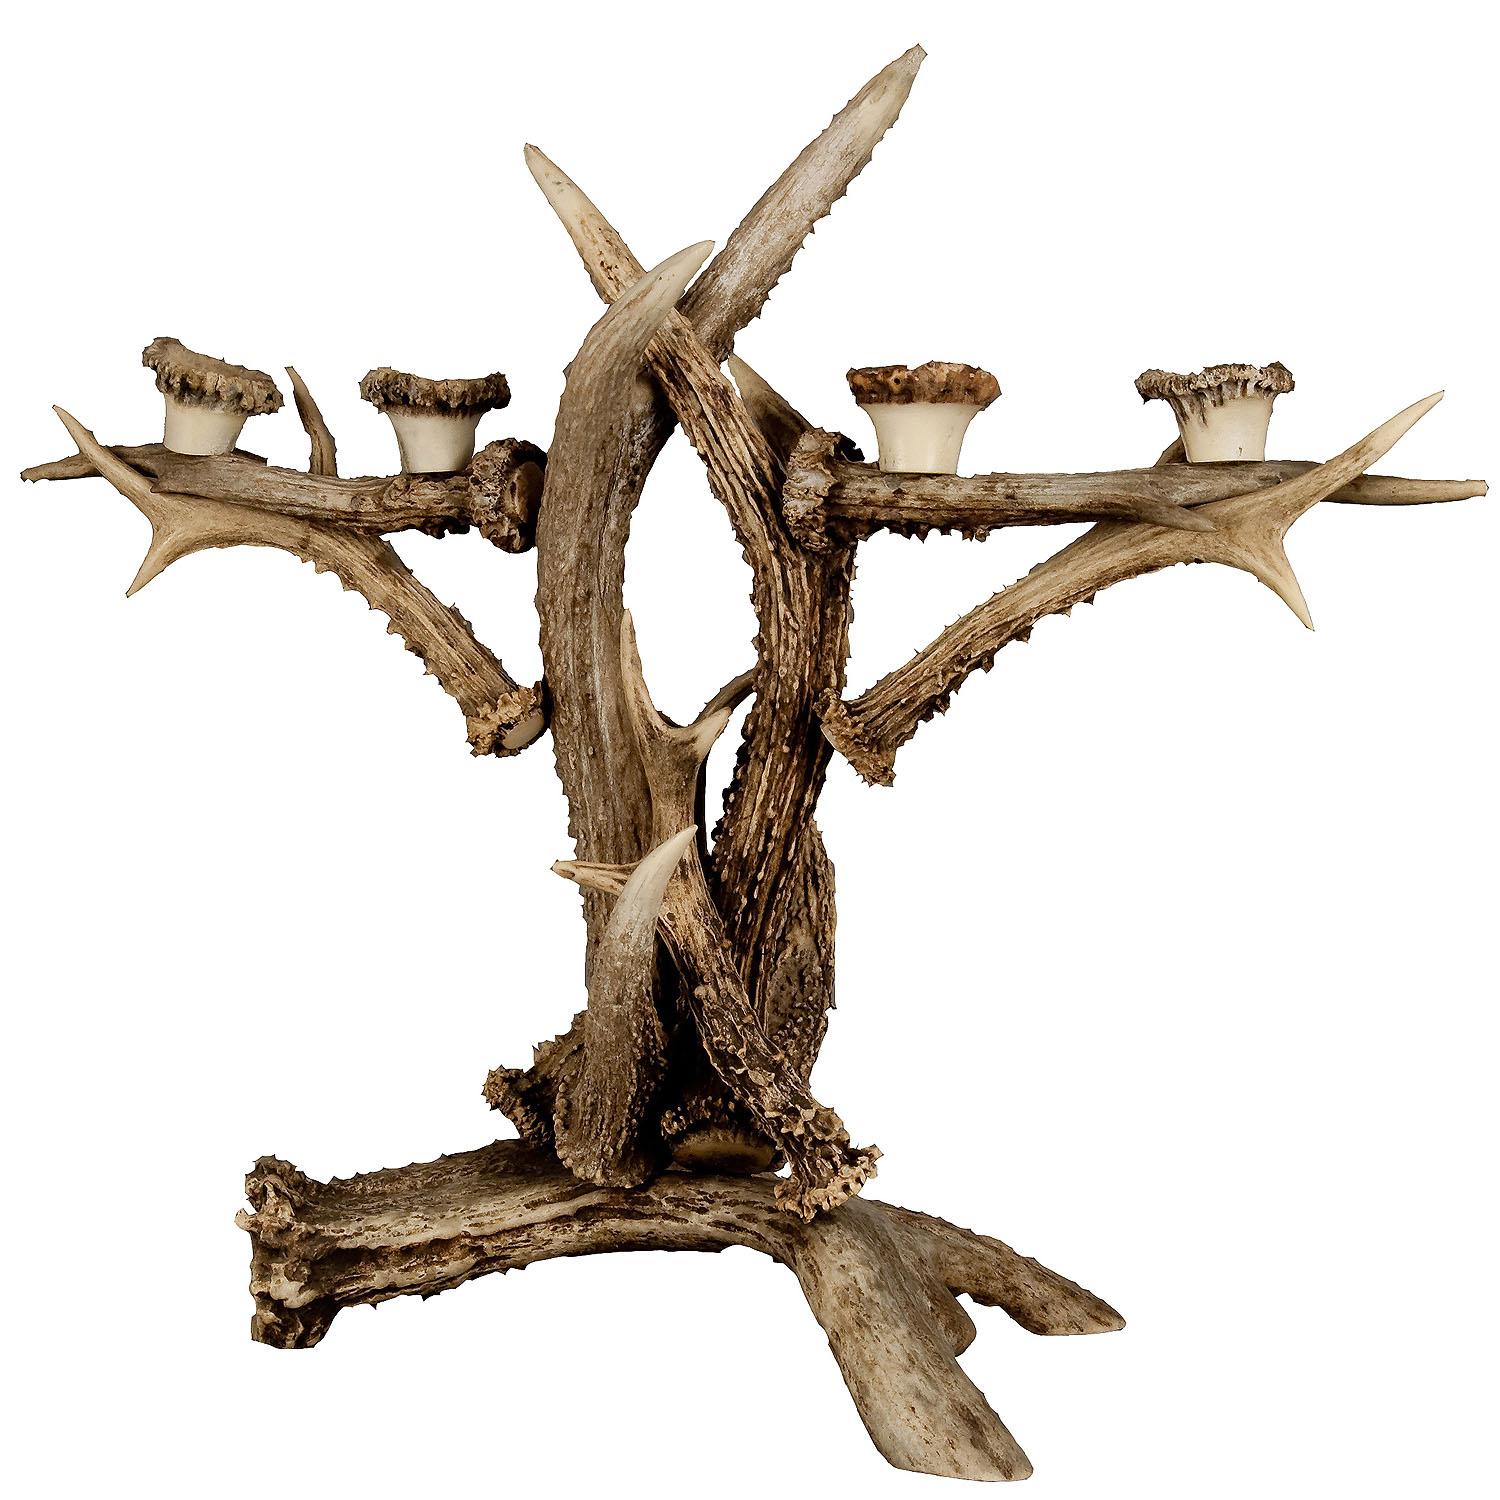 Large Antler Candle Holder ca. 1900

An antique large antler candle holder made from real deer and elk antlers. Made in the Black Forest region around 1900. A great addition to your rustic cabin decorations.

This article contains parts of animal